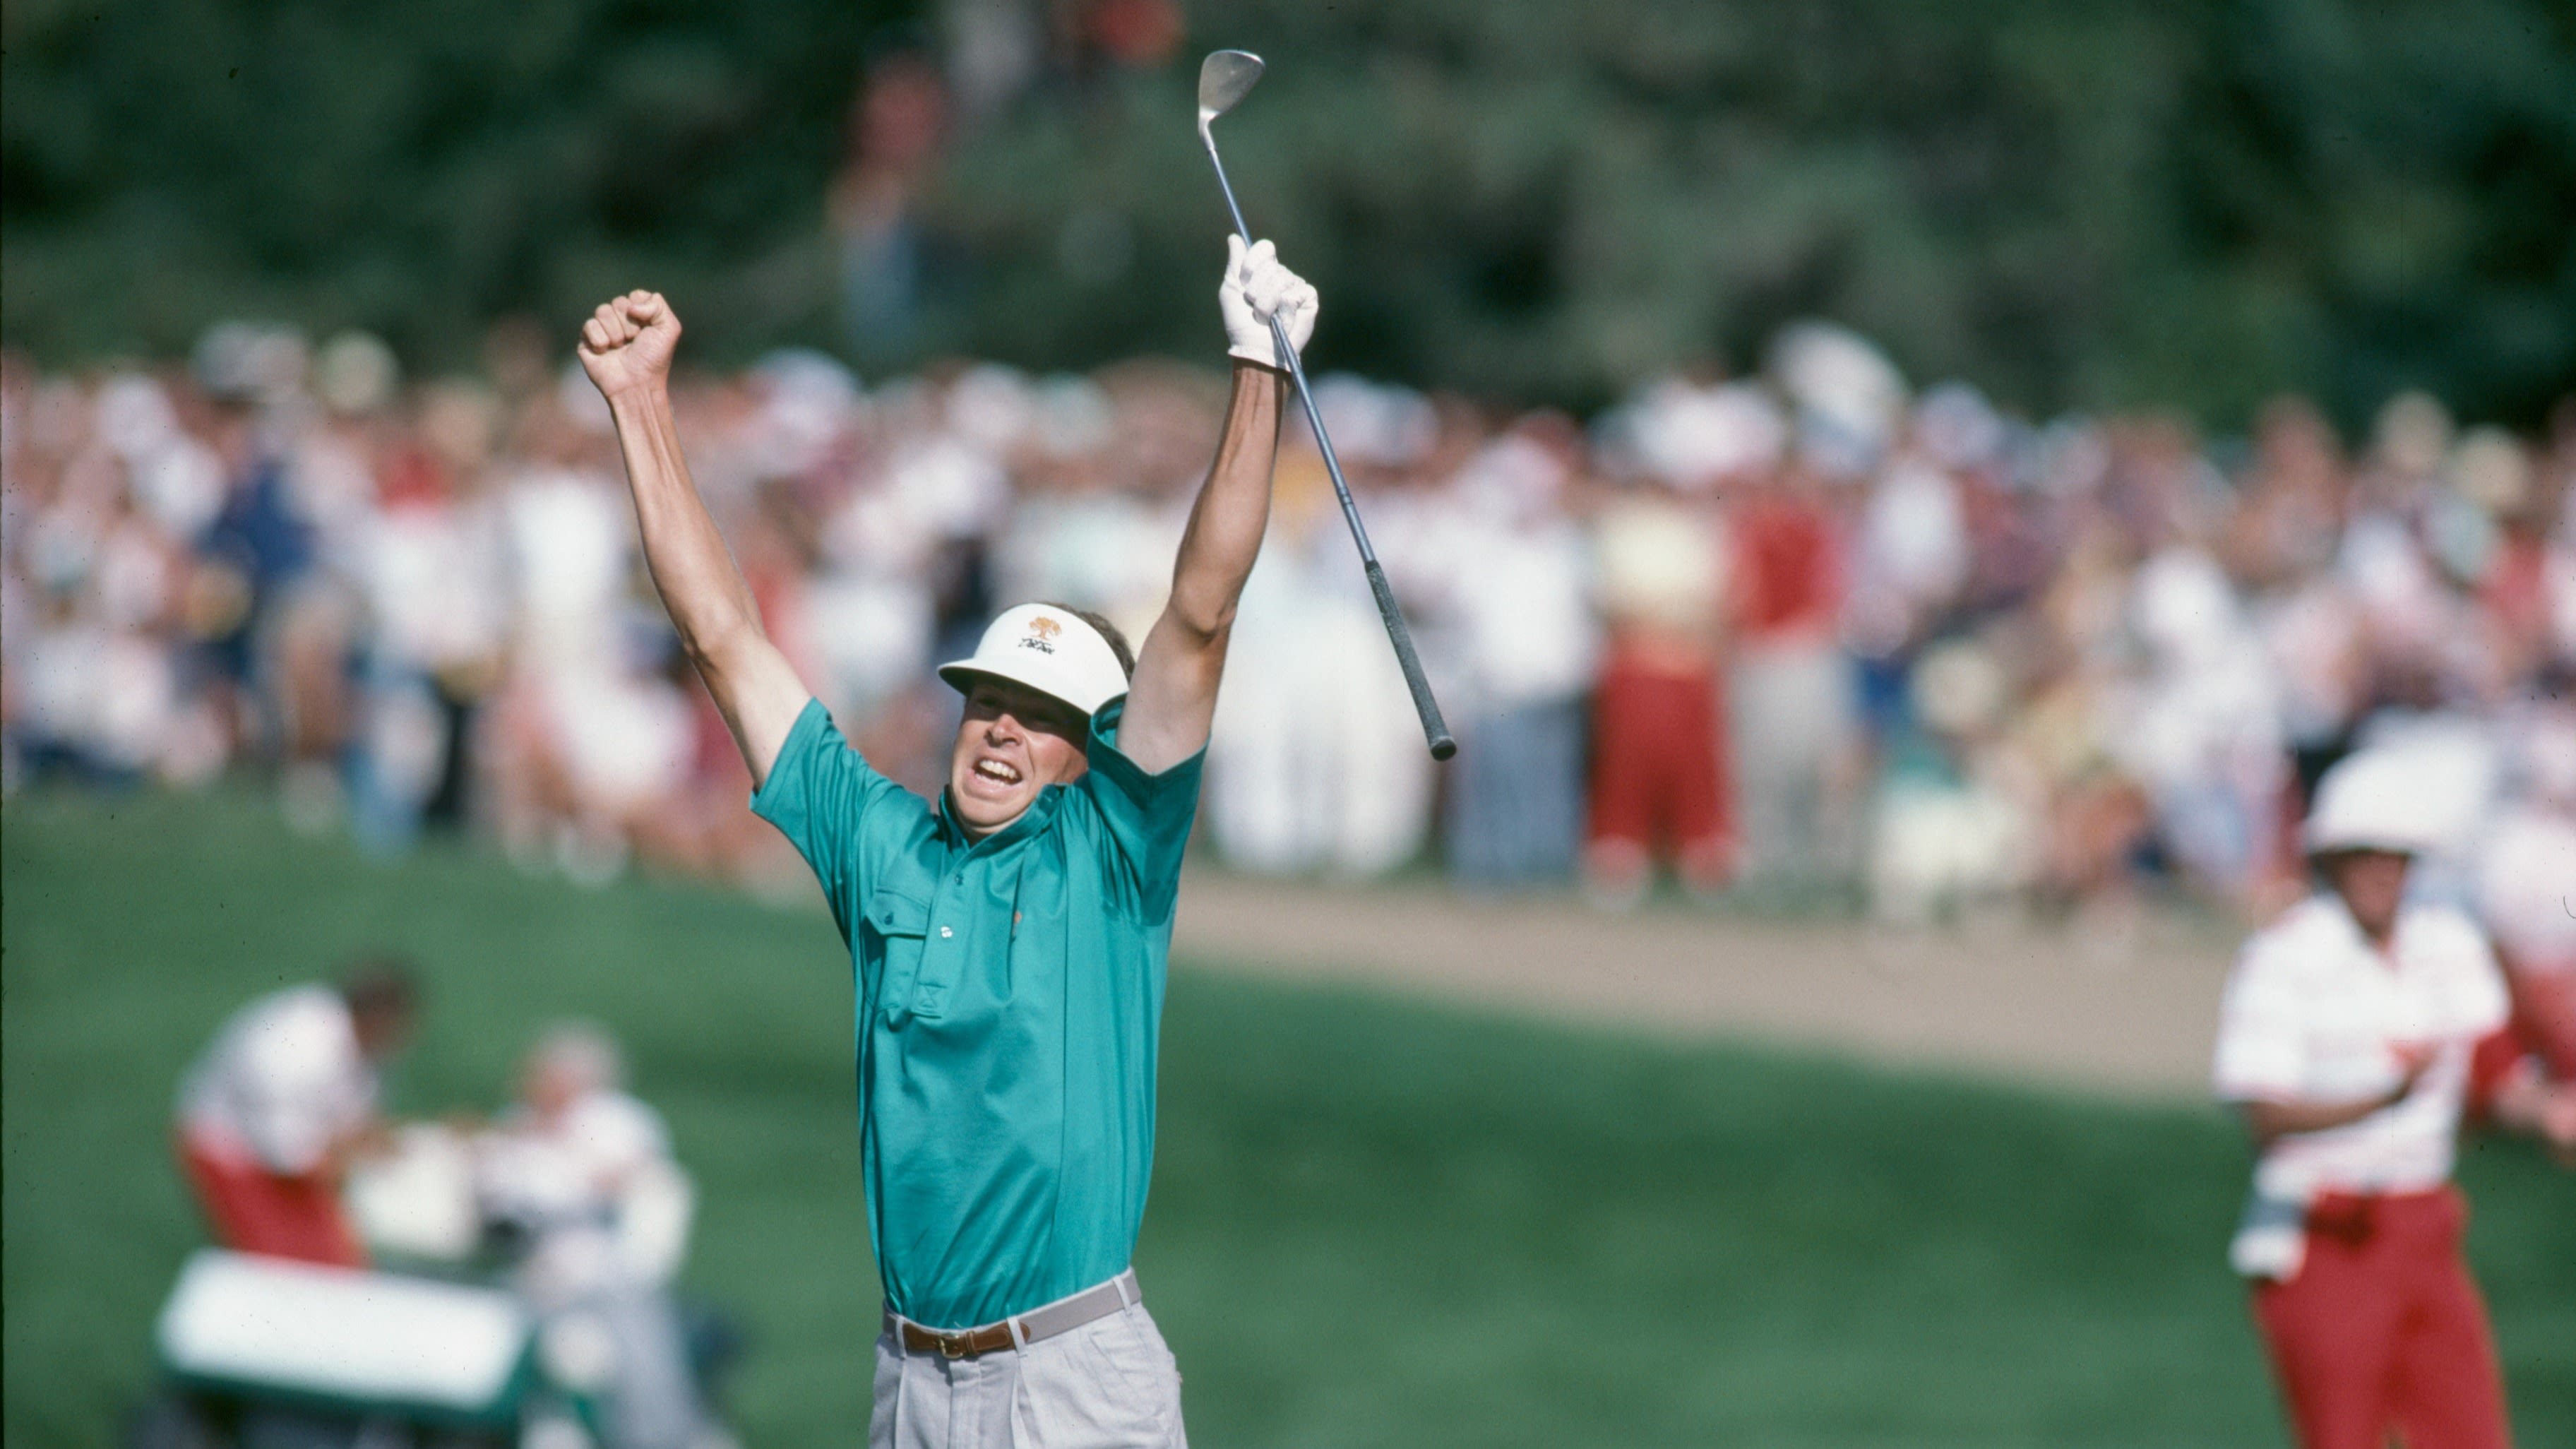 Bob Tway after holing his famous bunker shot to win in 1986. (Jeff McBride/PGA TOUR Archive)